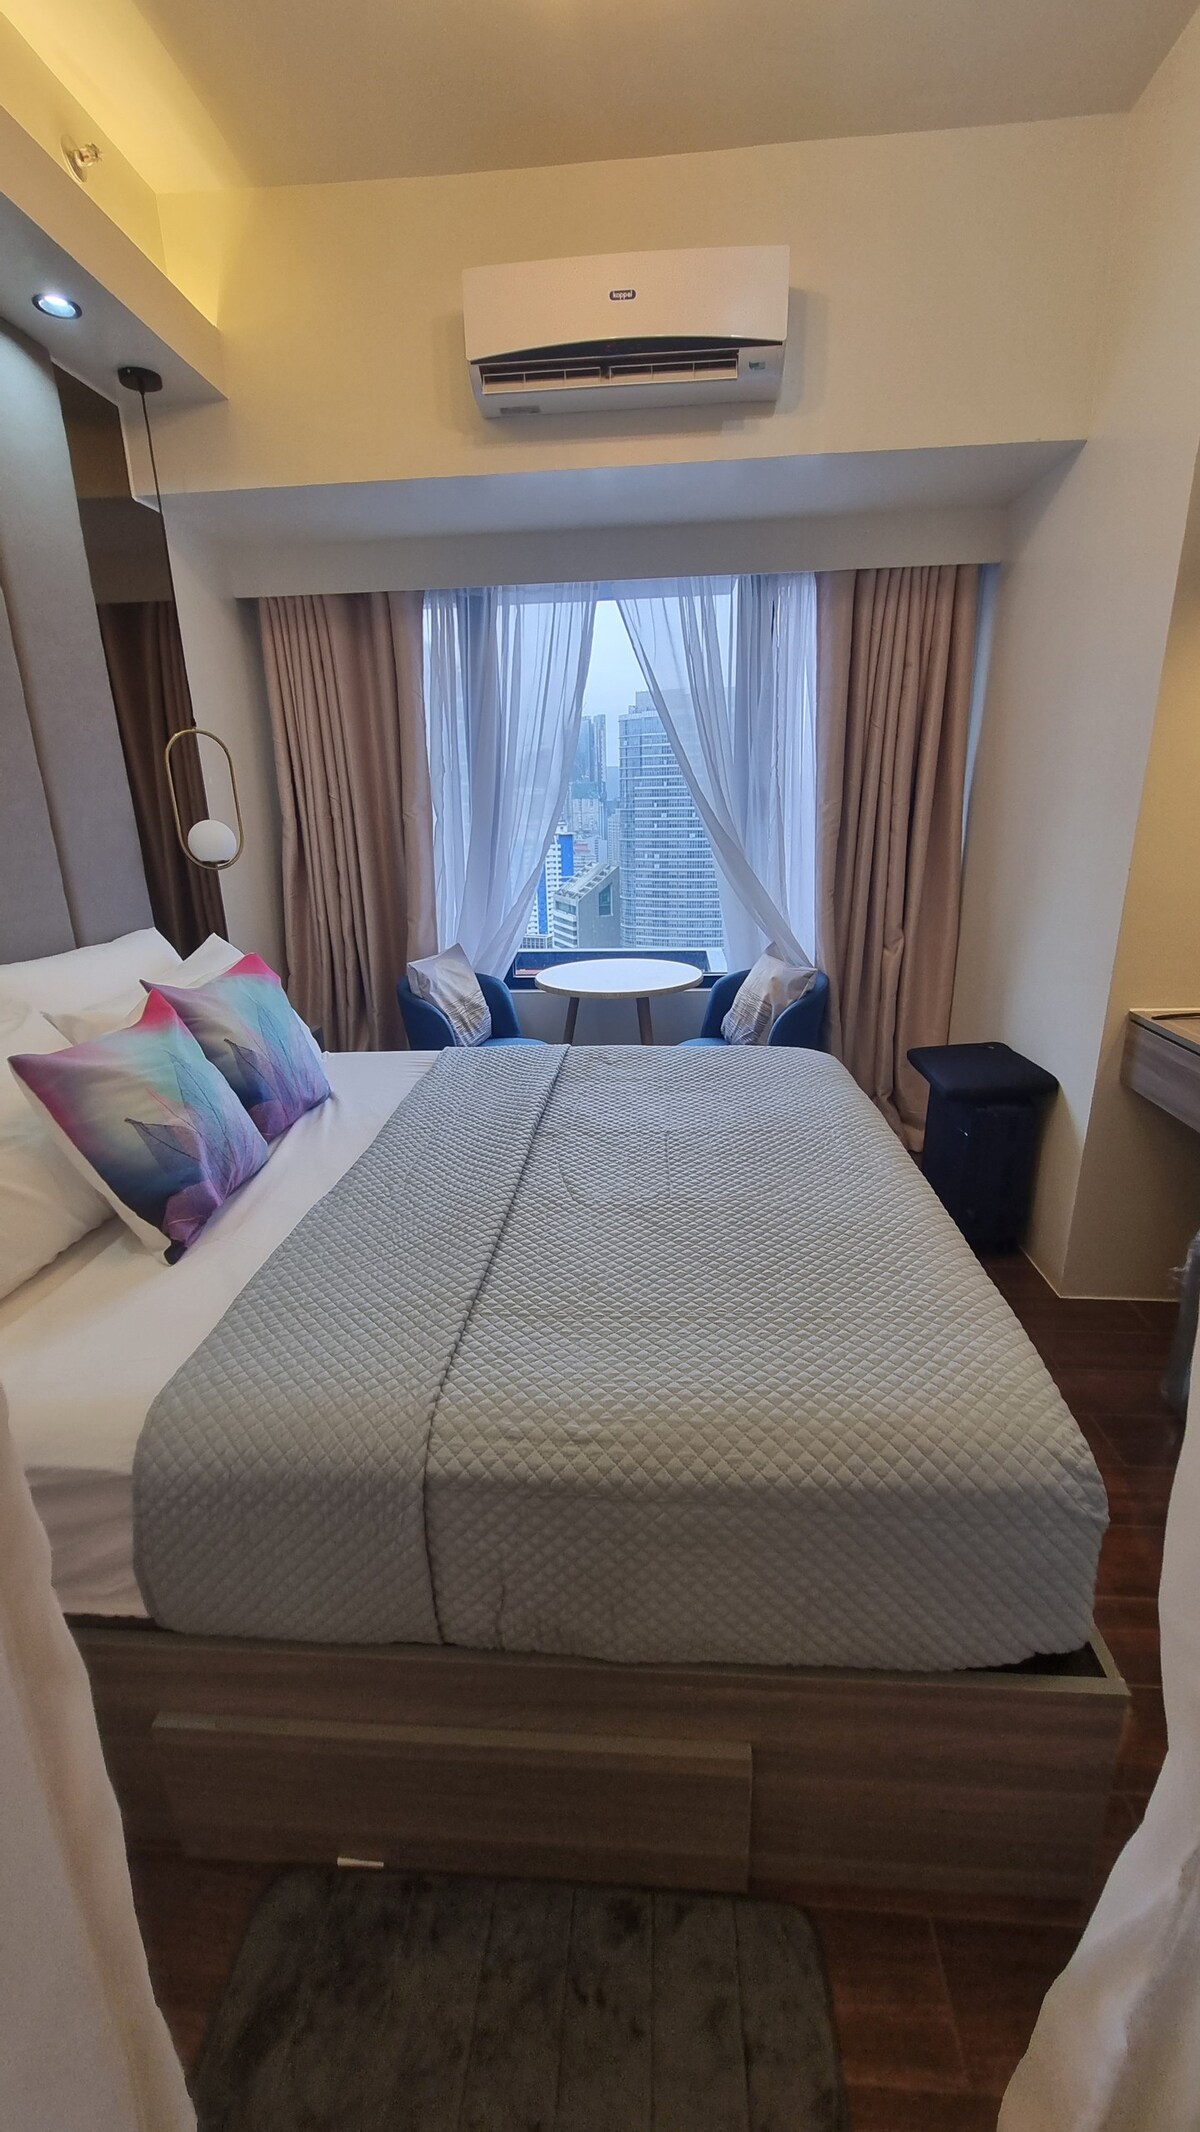 Makati Condo, Ayala View + 55" TV + Queen Bed